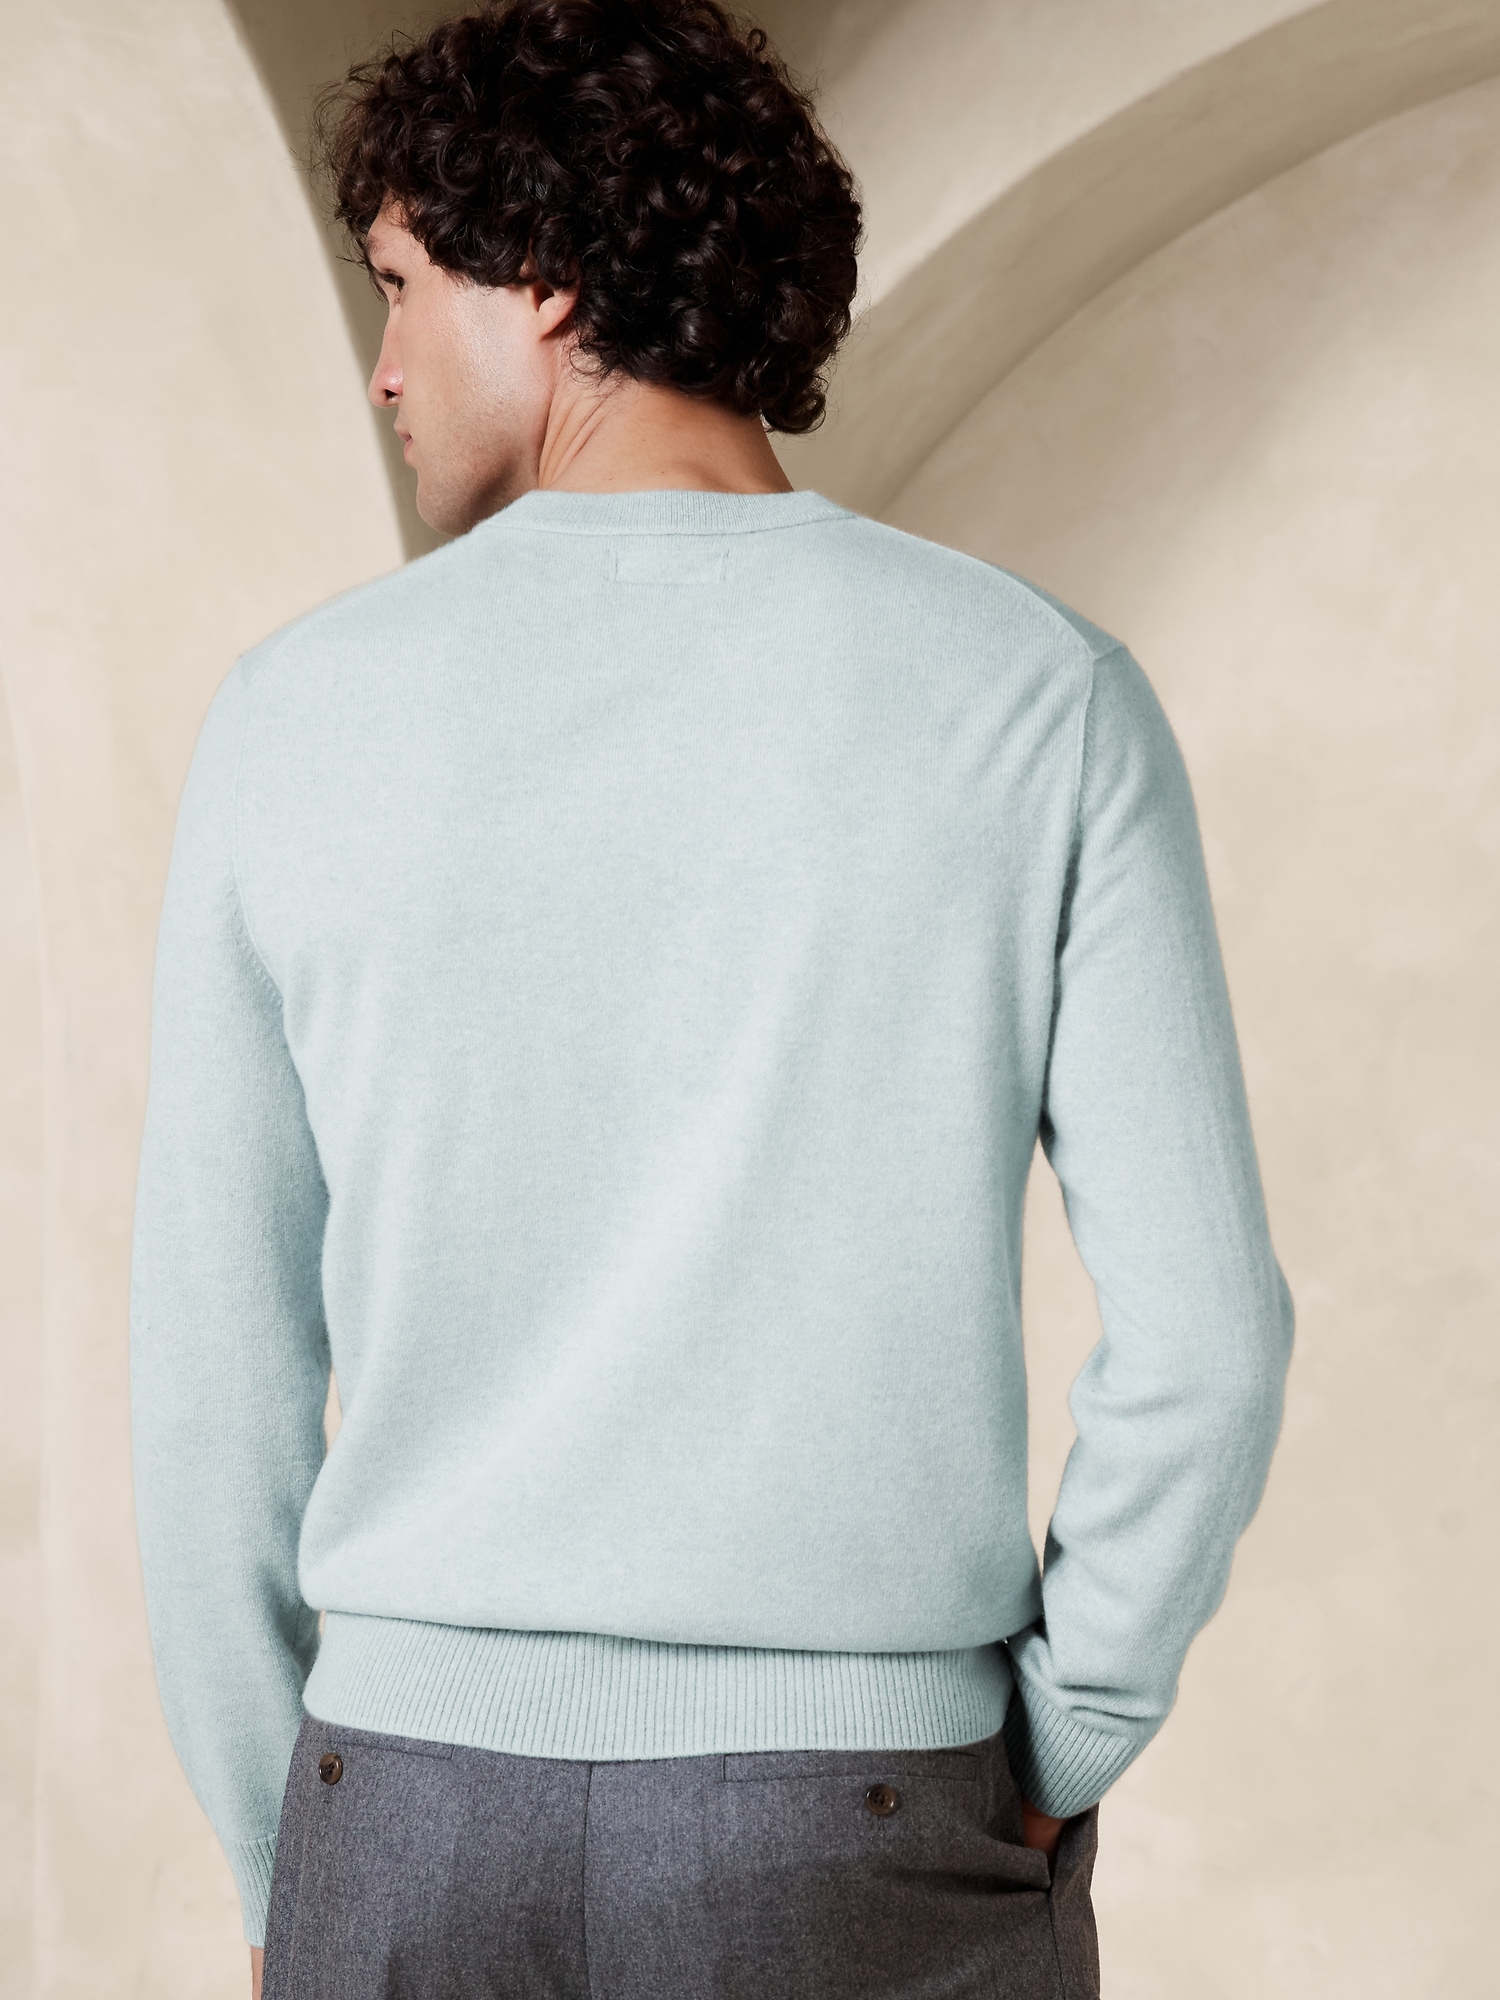 Men's Refined Twisted Texture Sweater